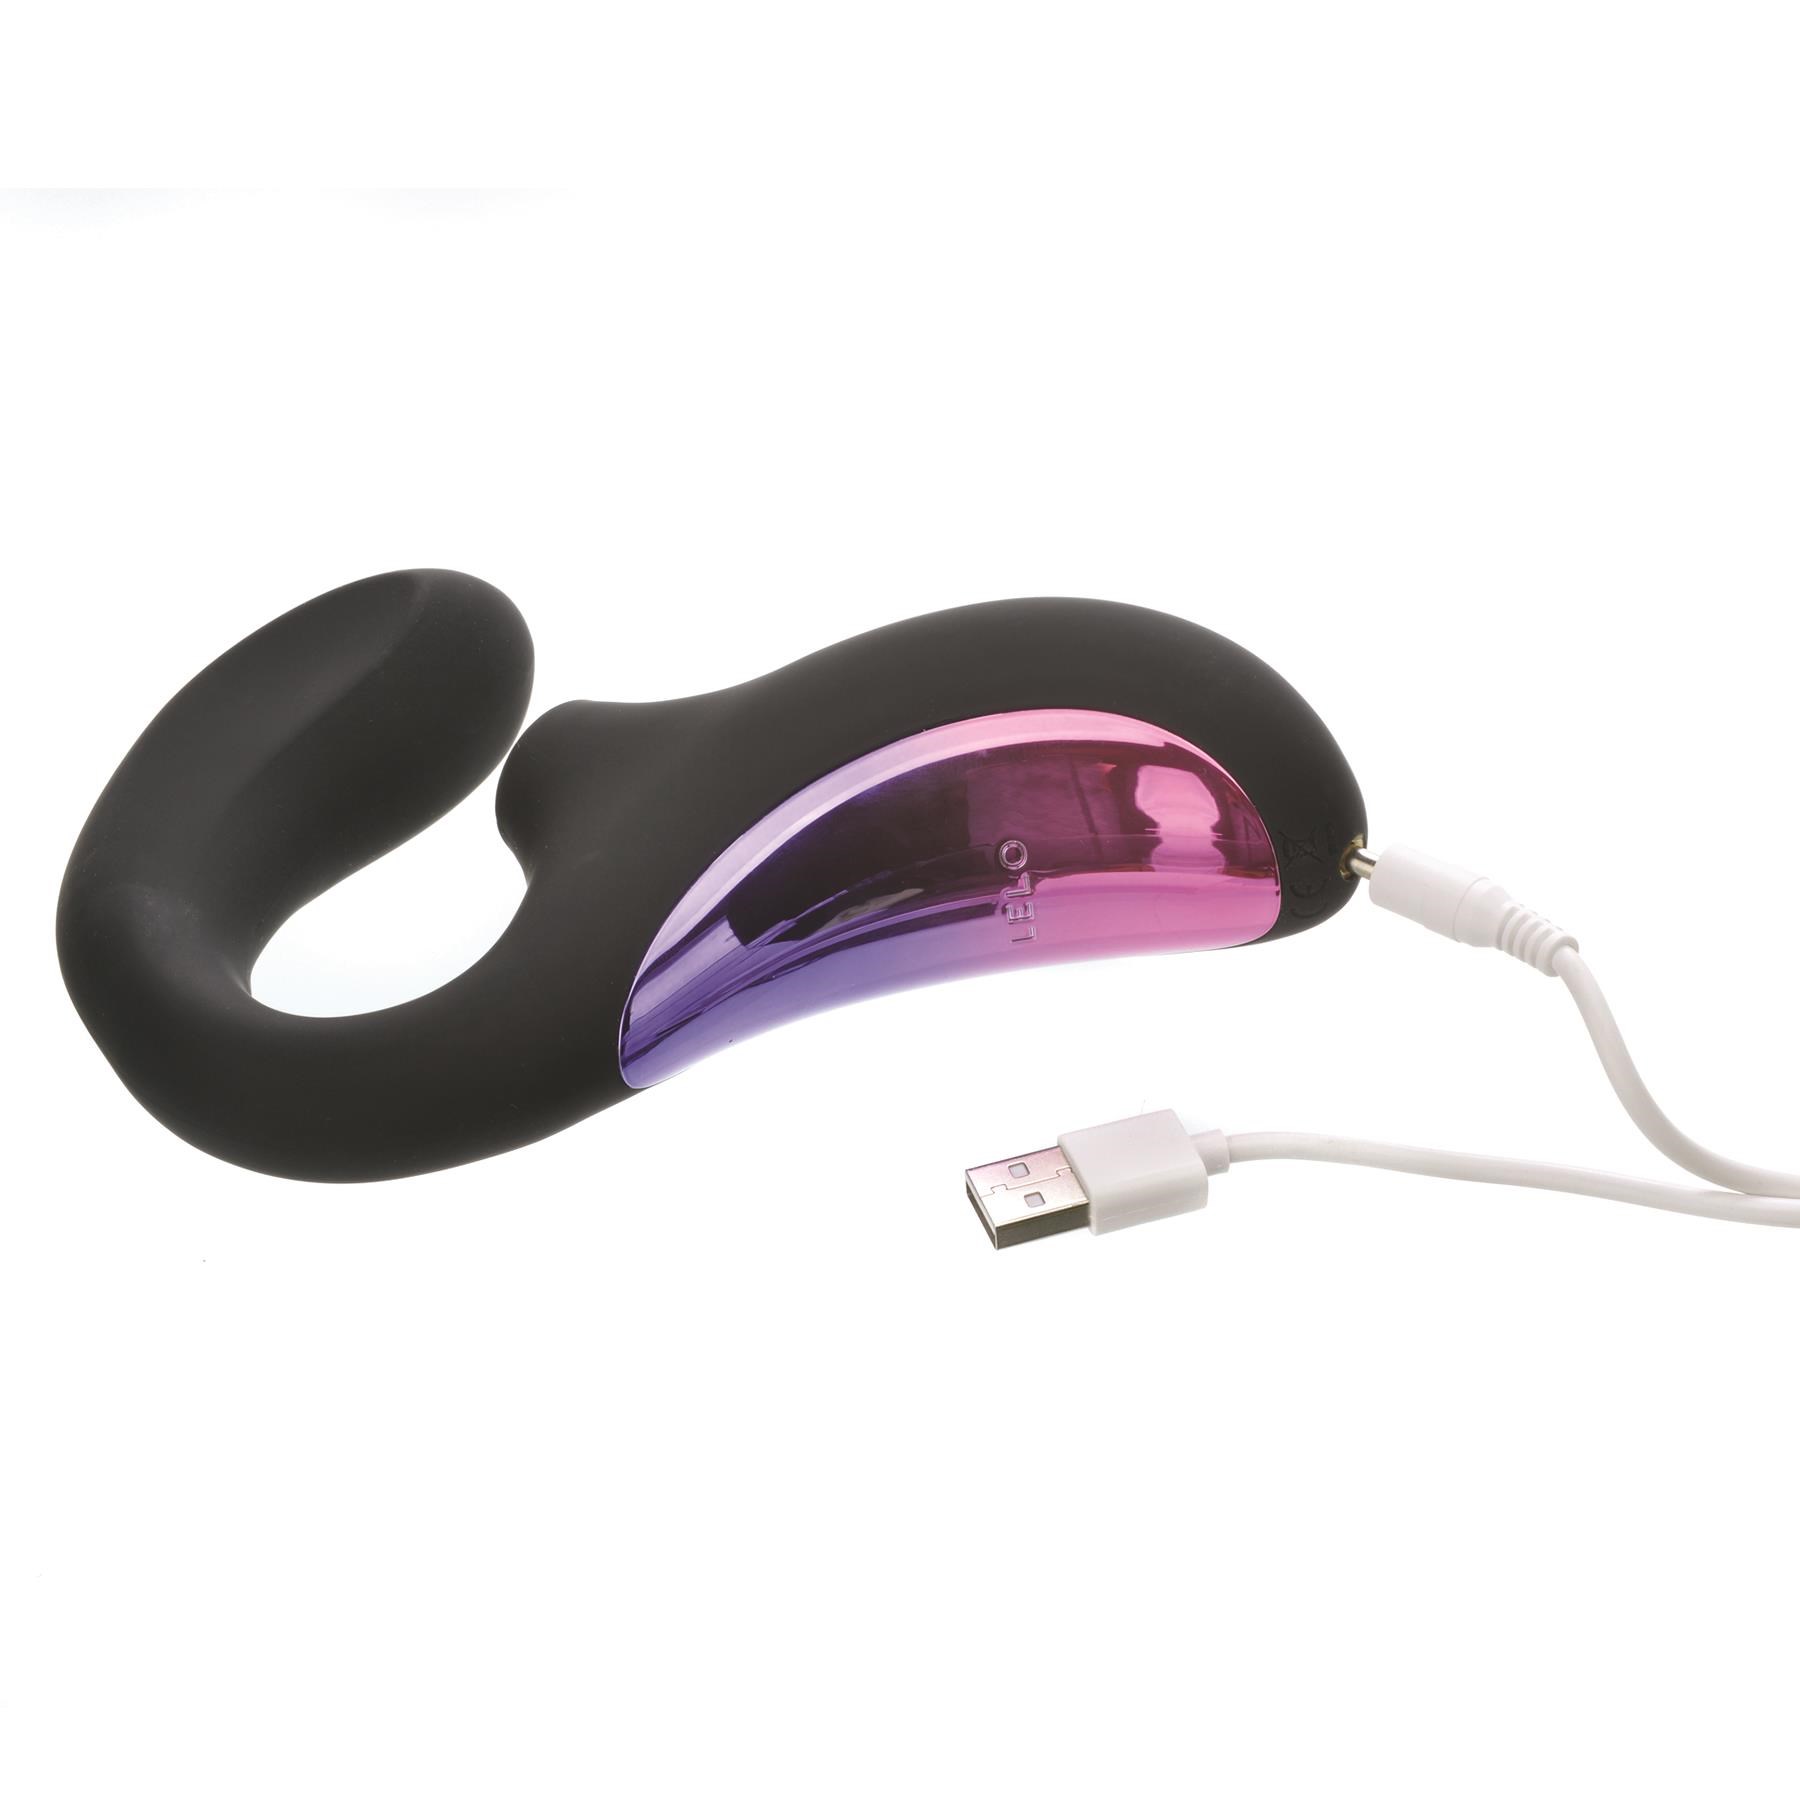 Lelo Enigma Cruise Sonic Dual Stimulator - Product Shot Showing Where Charger Cable is Inserted